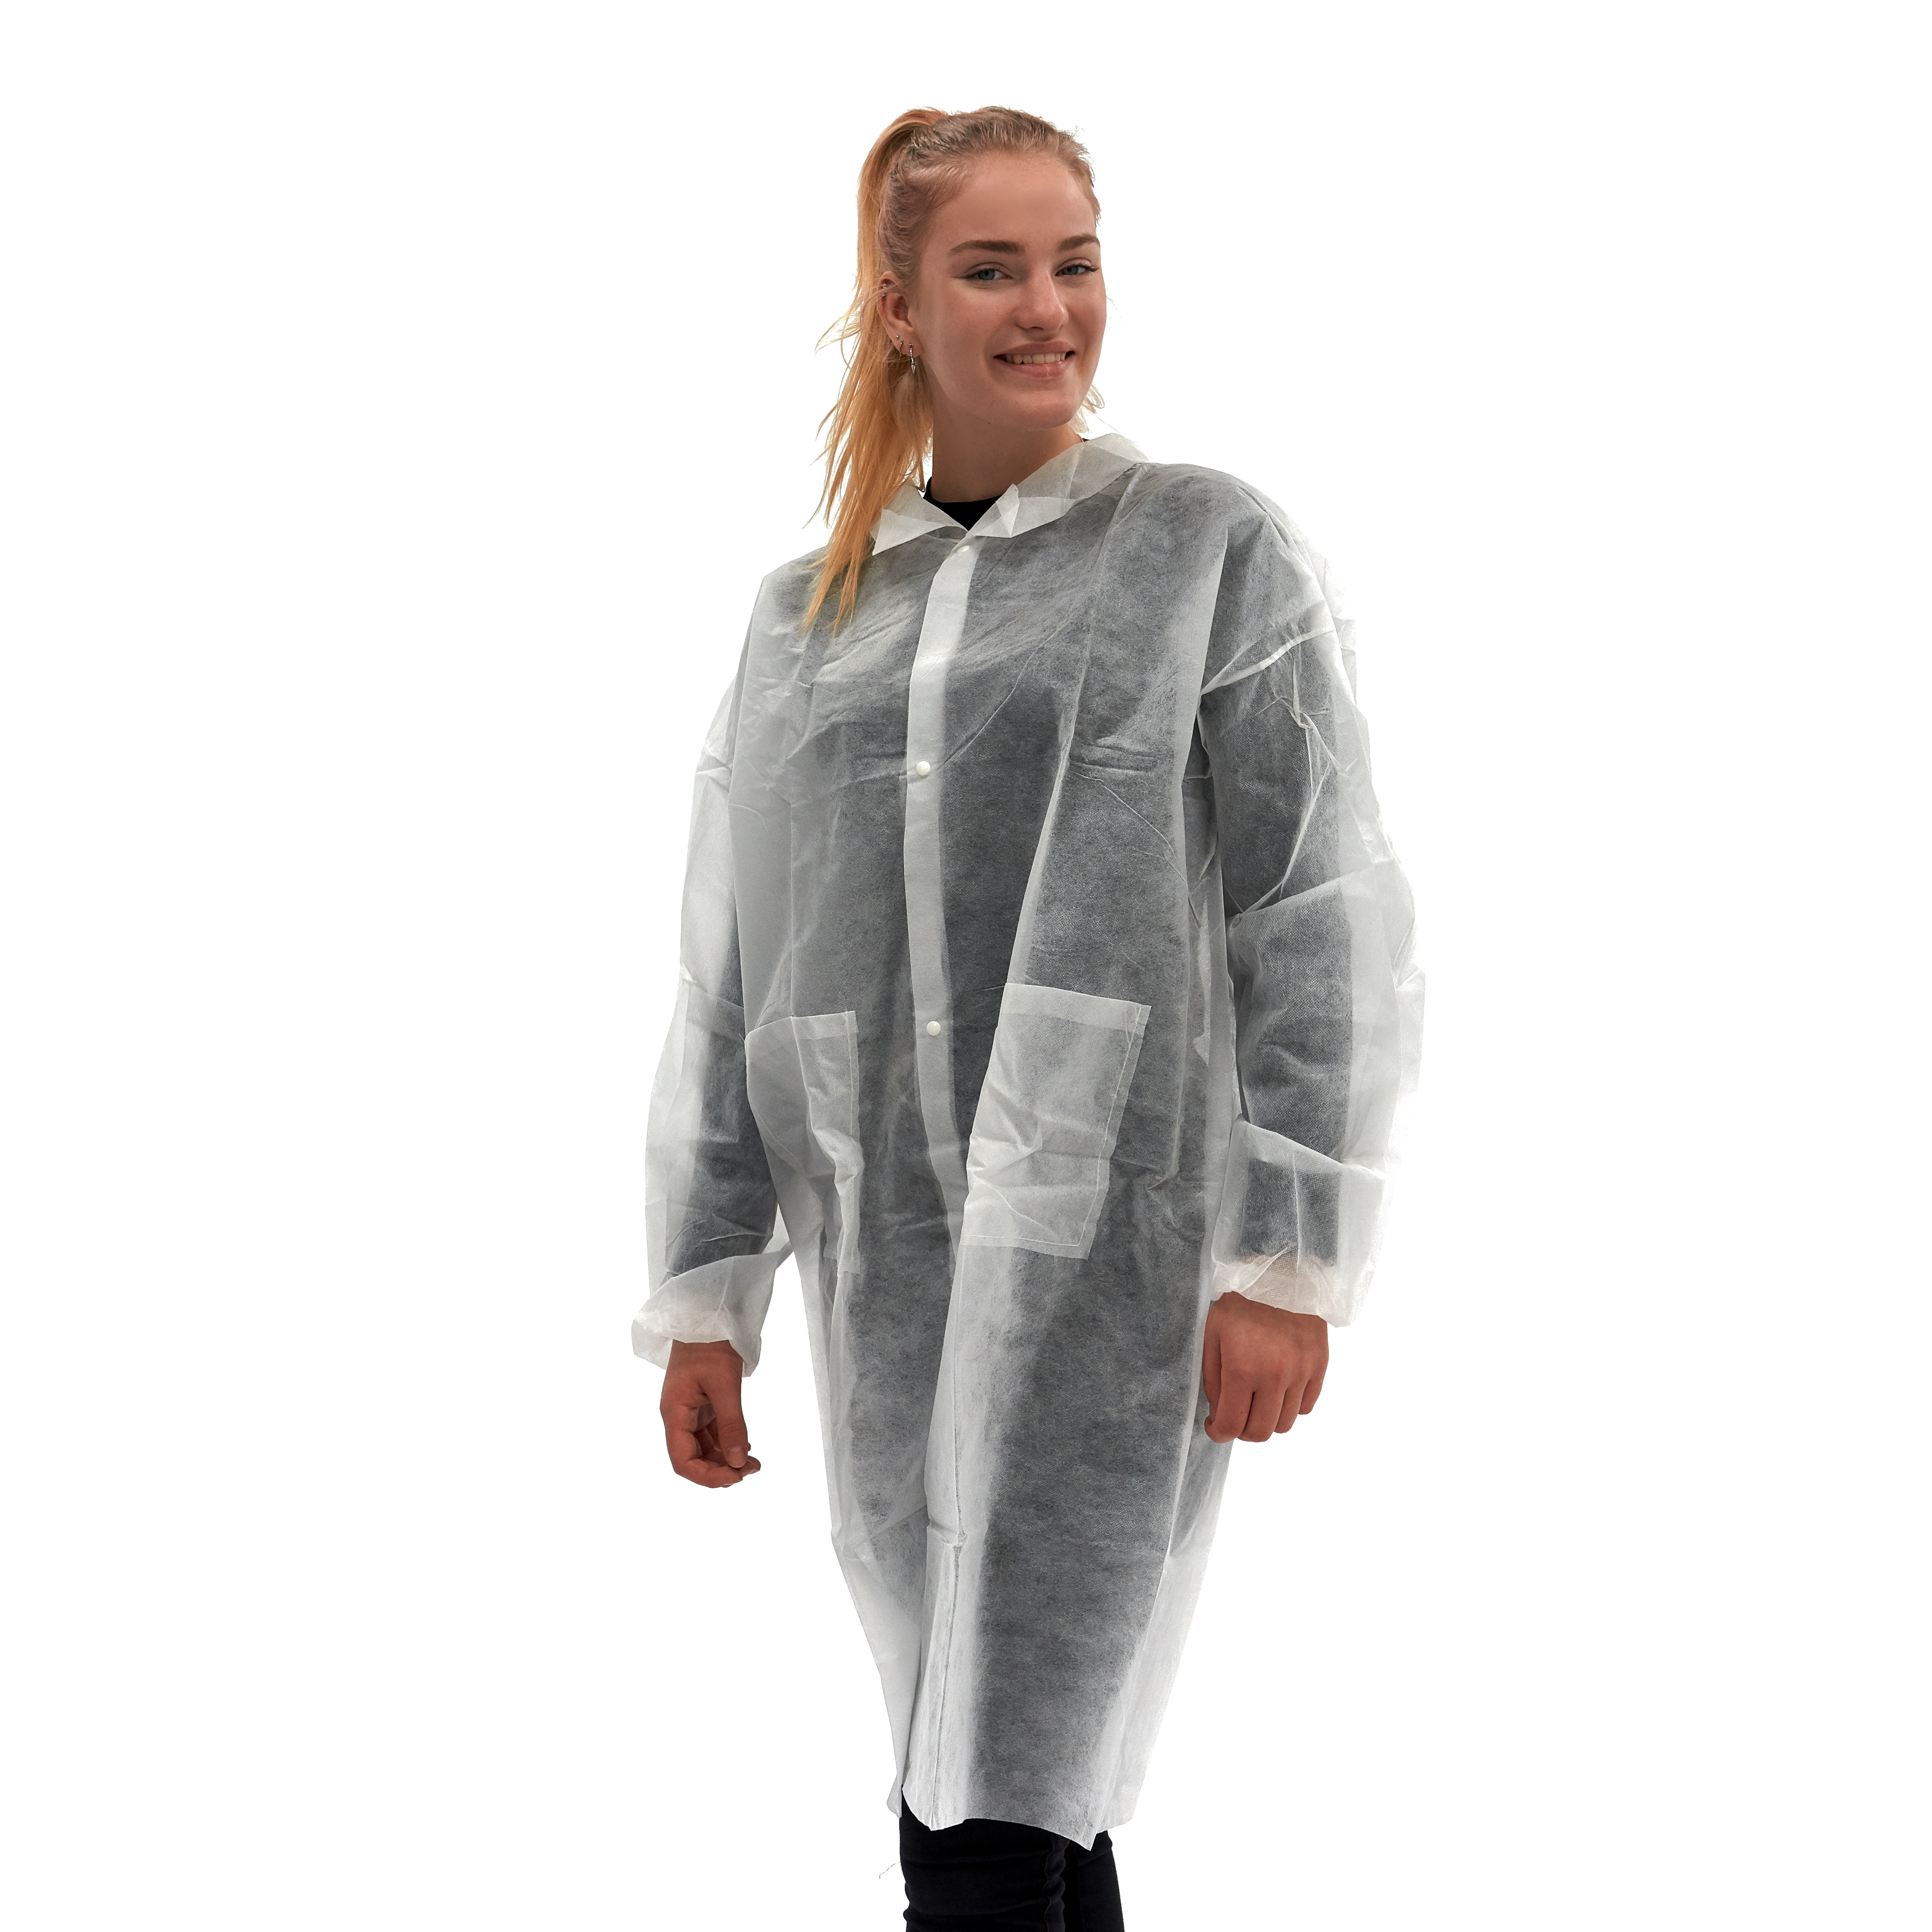 VC-L Romed visitor coats, size large, non-woven, white, per piece in a polybag, 50 pcs in a carton.